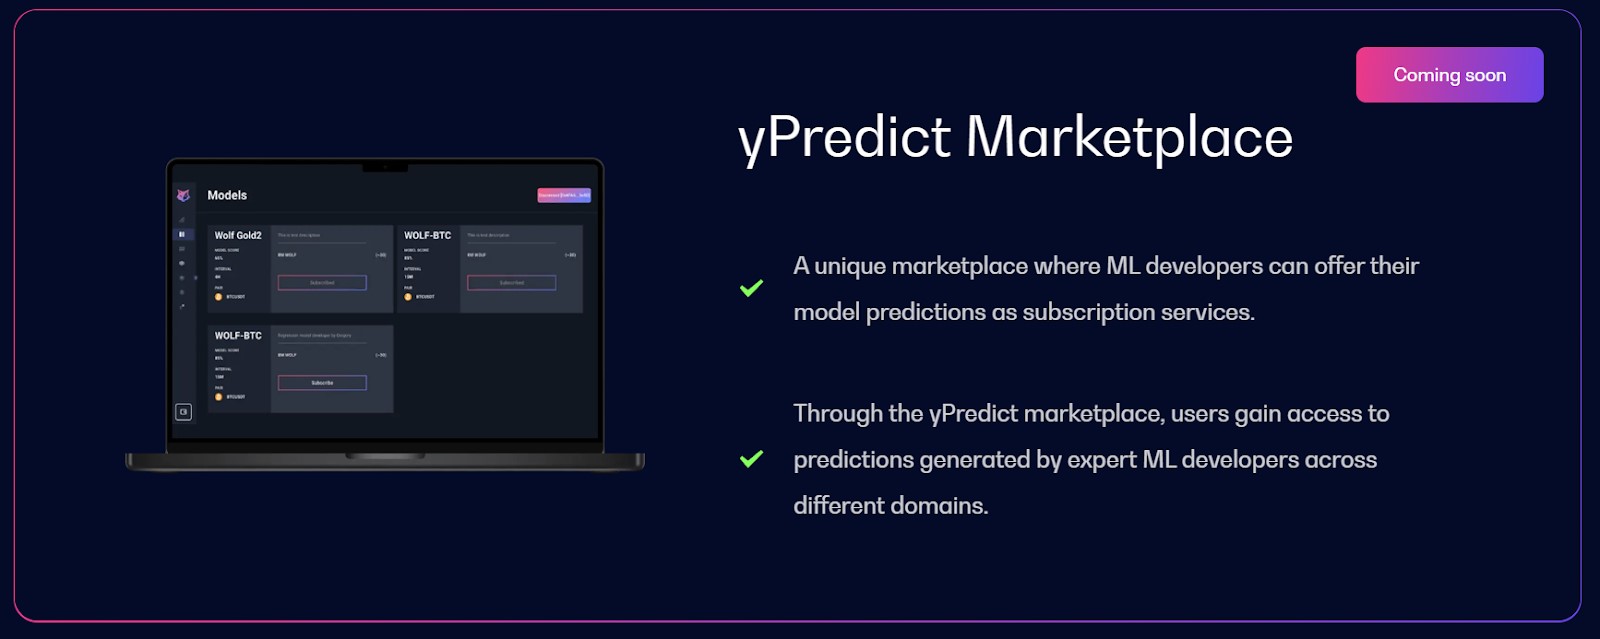 yPredict Marketplace